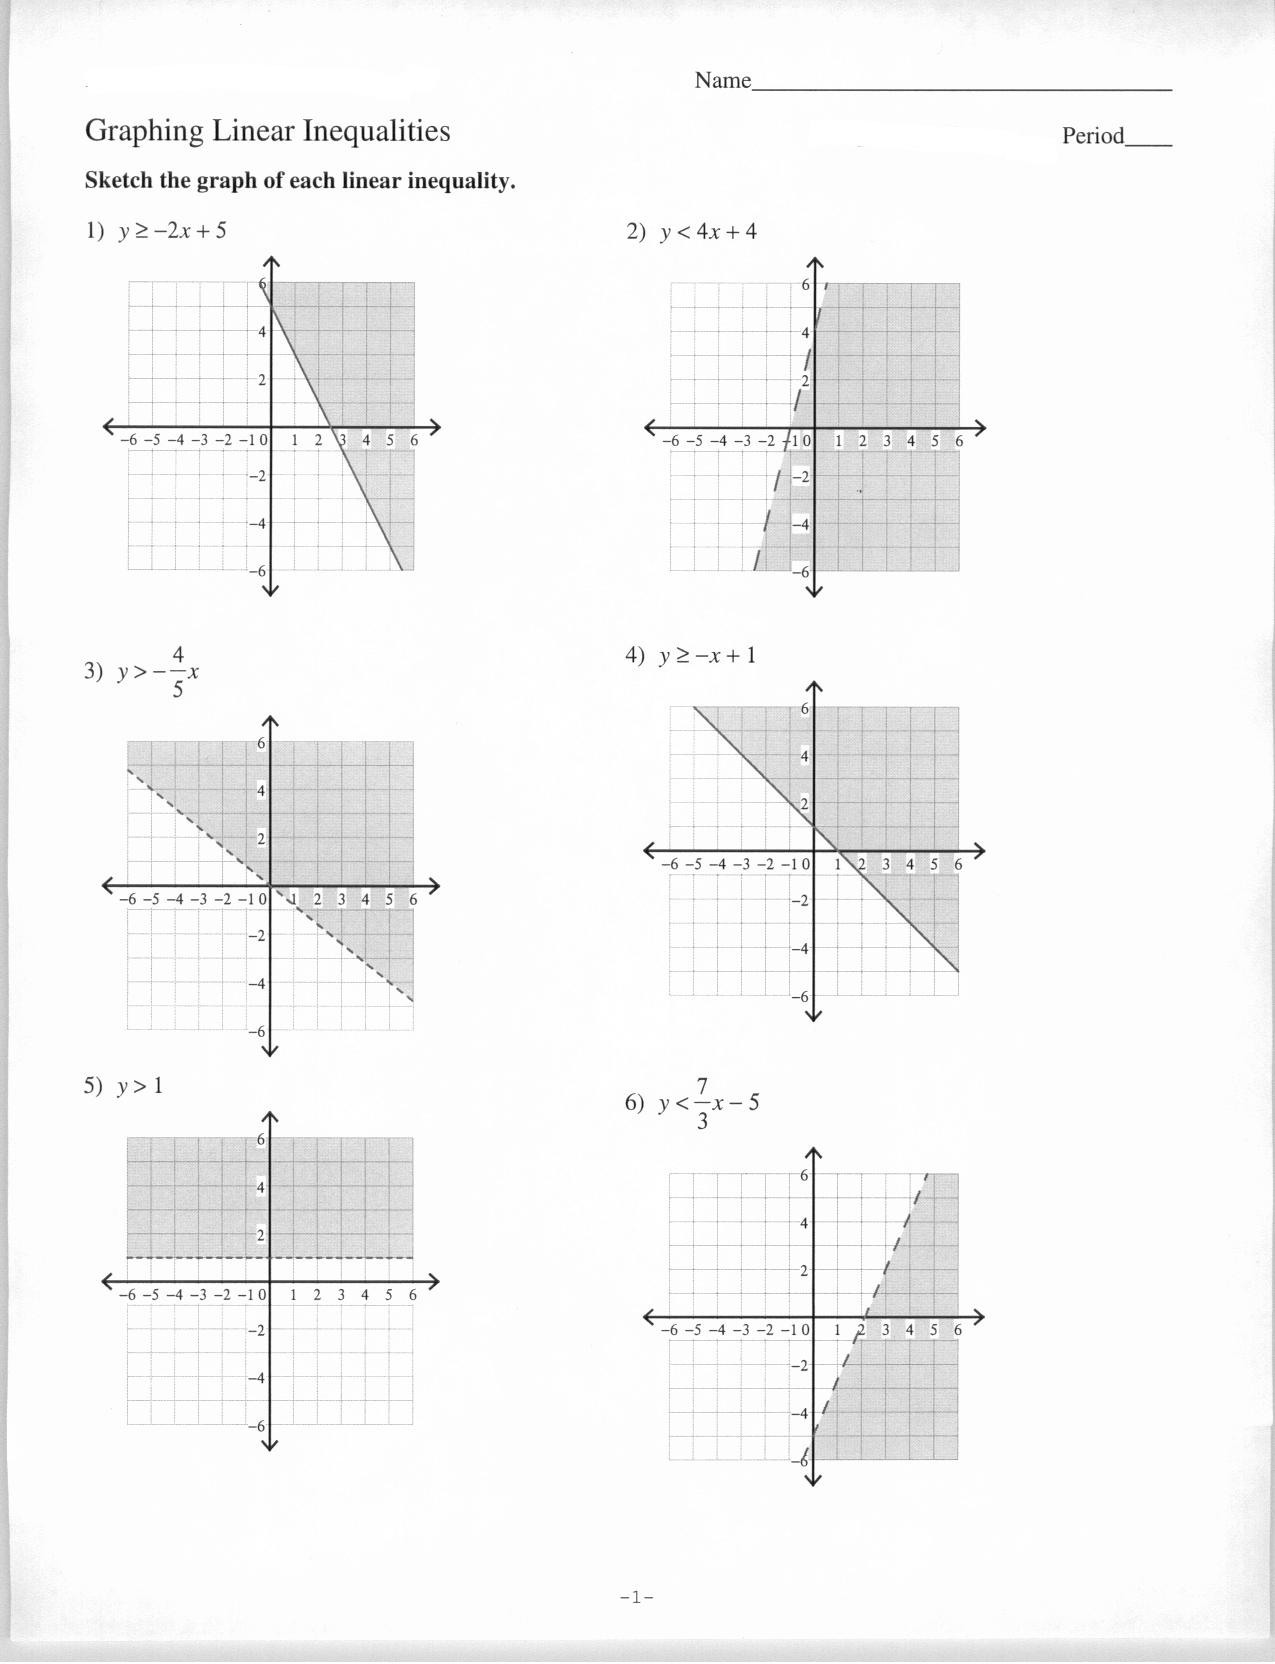 graphing-inequalities-in-two-variables-worksheet-db-excel